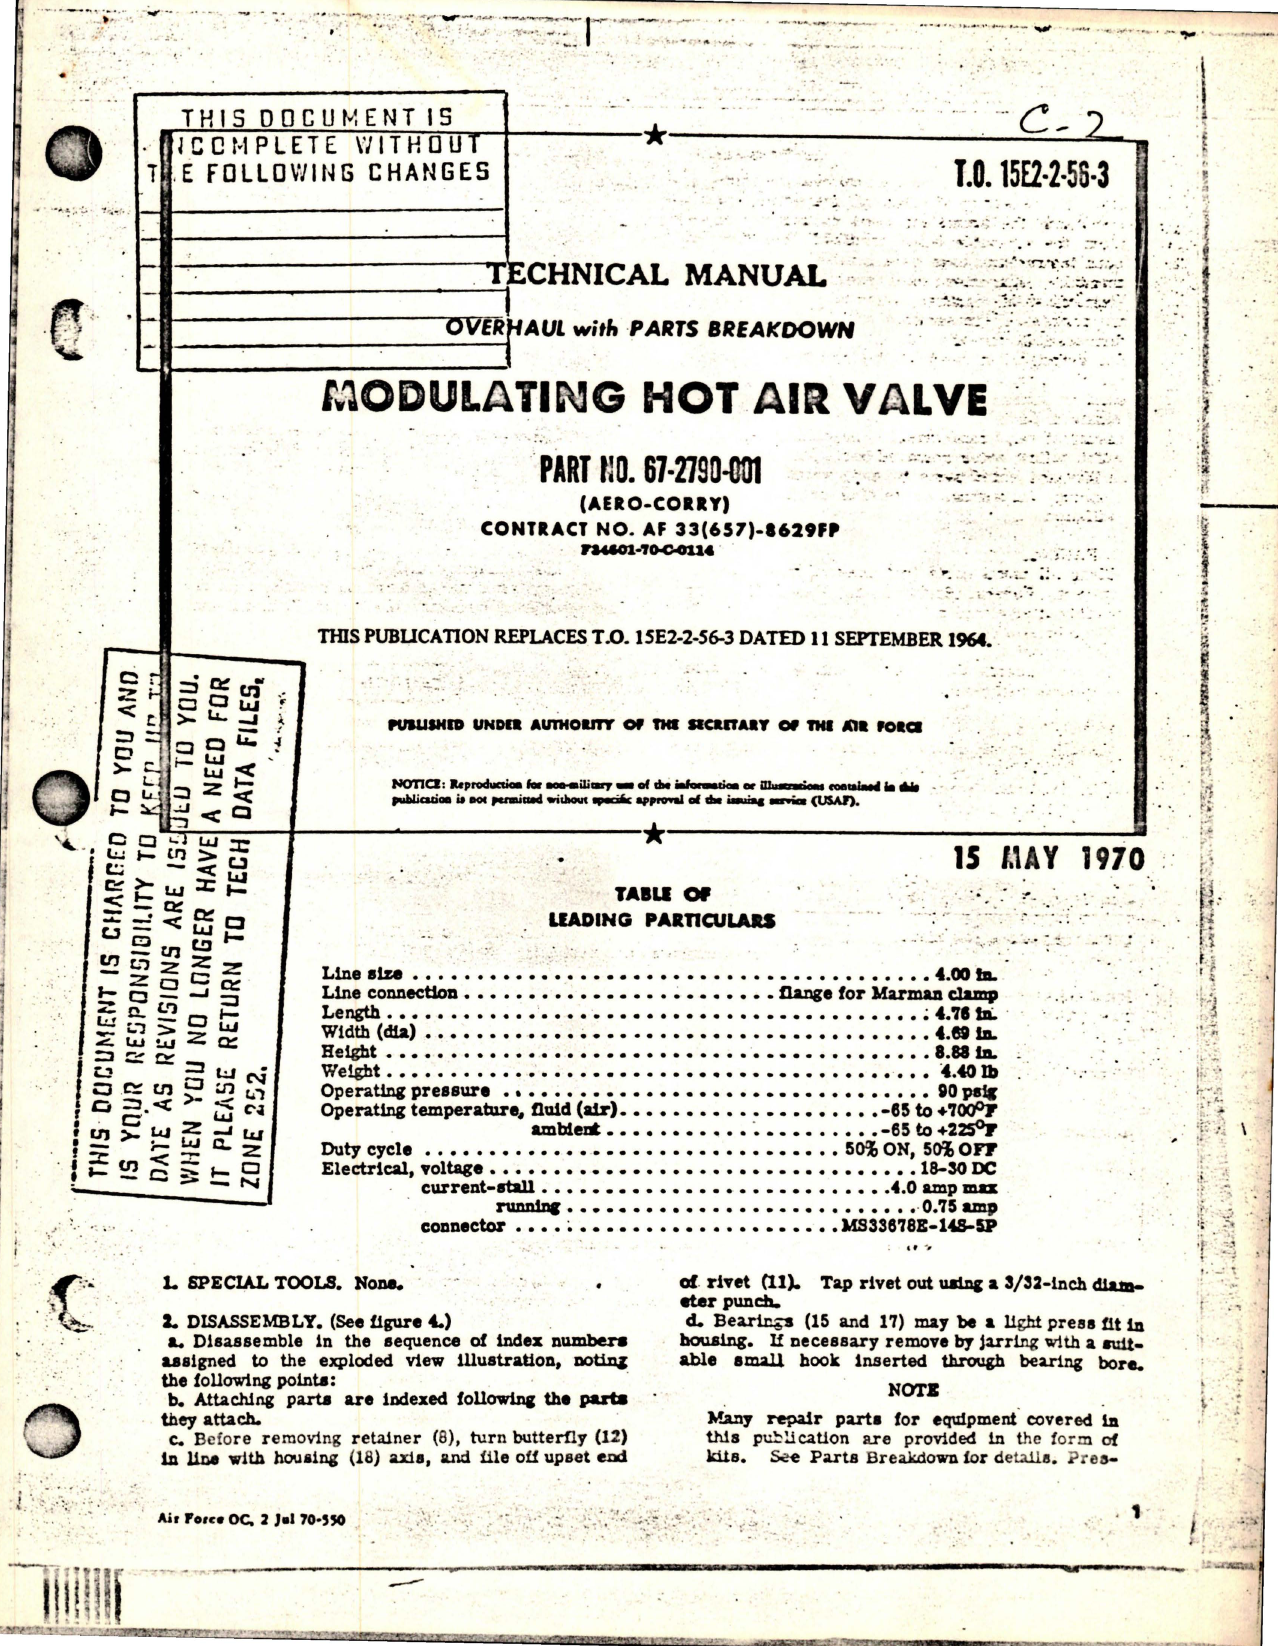 Sample page 1 from AirCorps Library document: Overhaul with Parts Breakdown for Modulating Hot Air Valve - Part 67-2790-001 